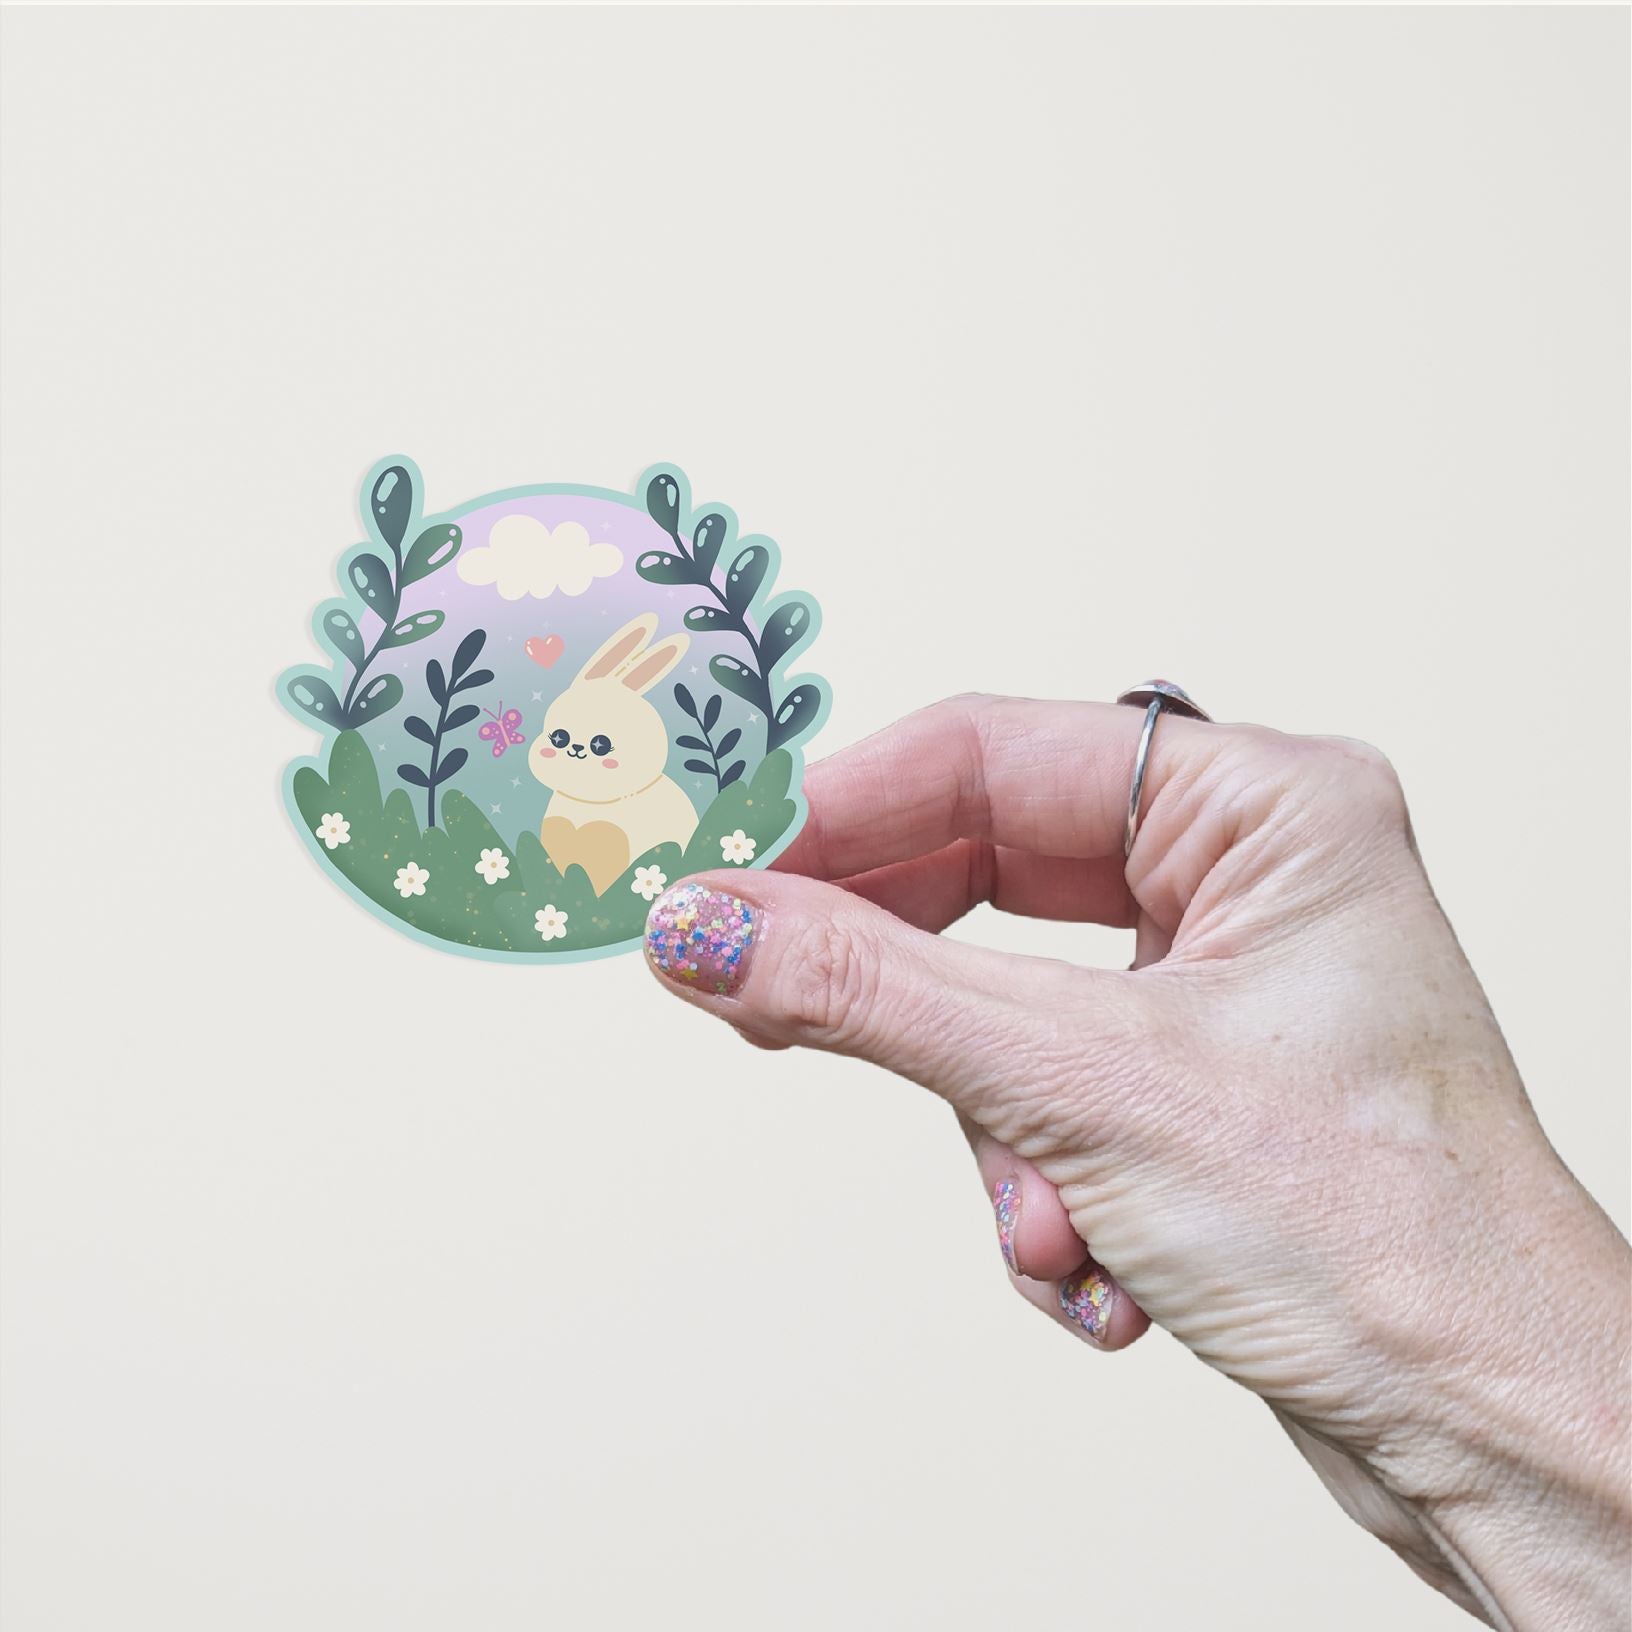 A hand holding a hand-drawn die cut matte vinyl sticker featuring a cute Kawaii bunny sitting in a meadow surrounded by leaves, flowers, a pink butterfly, a heart, and a cloud in the background.